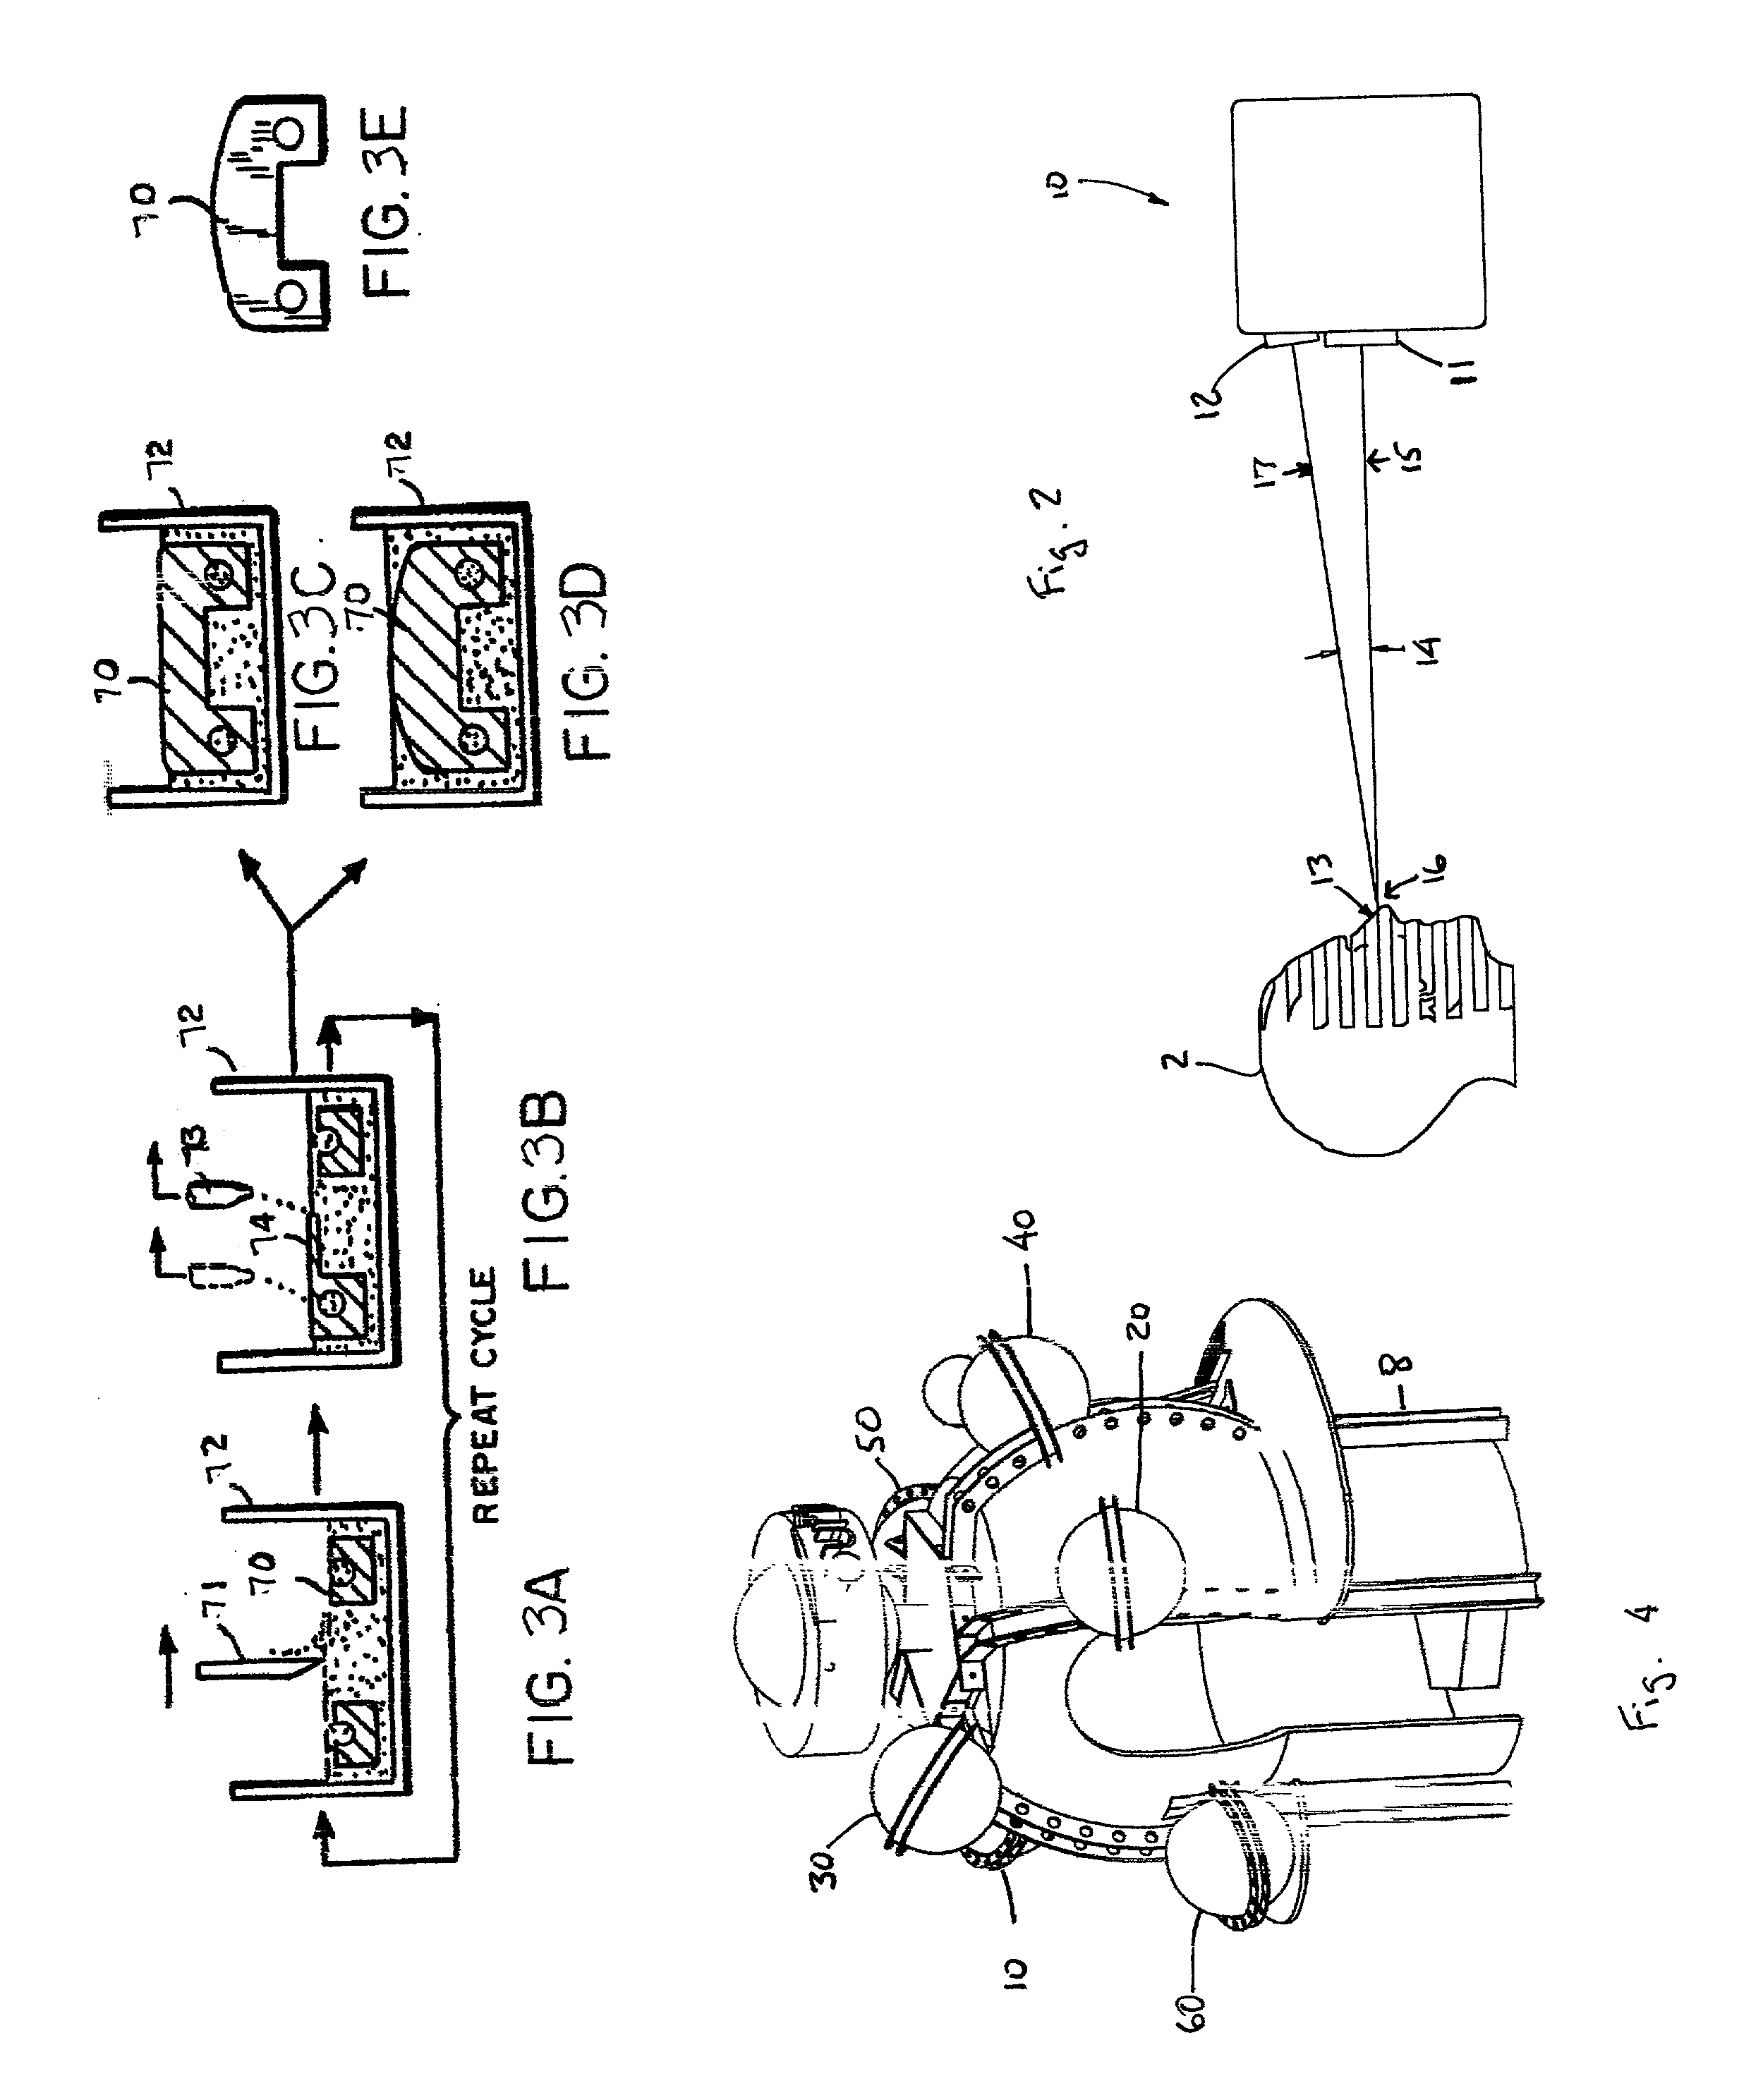 Apparatus and method for three-dimensional scanning of a subject, fabrication of a model therefrom, and the model produced thereby